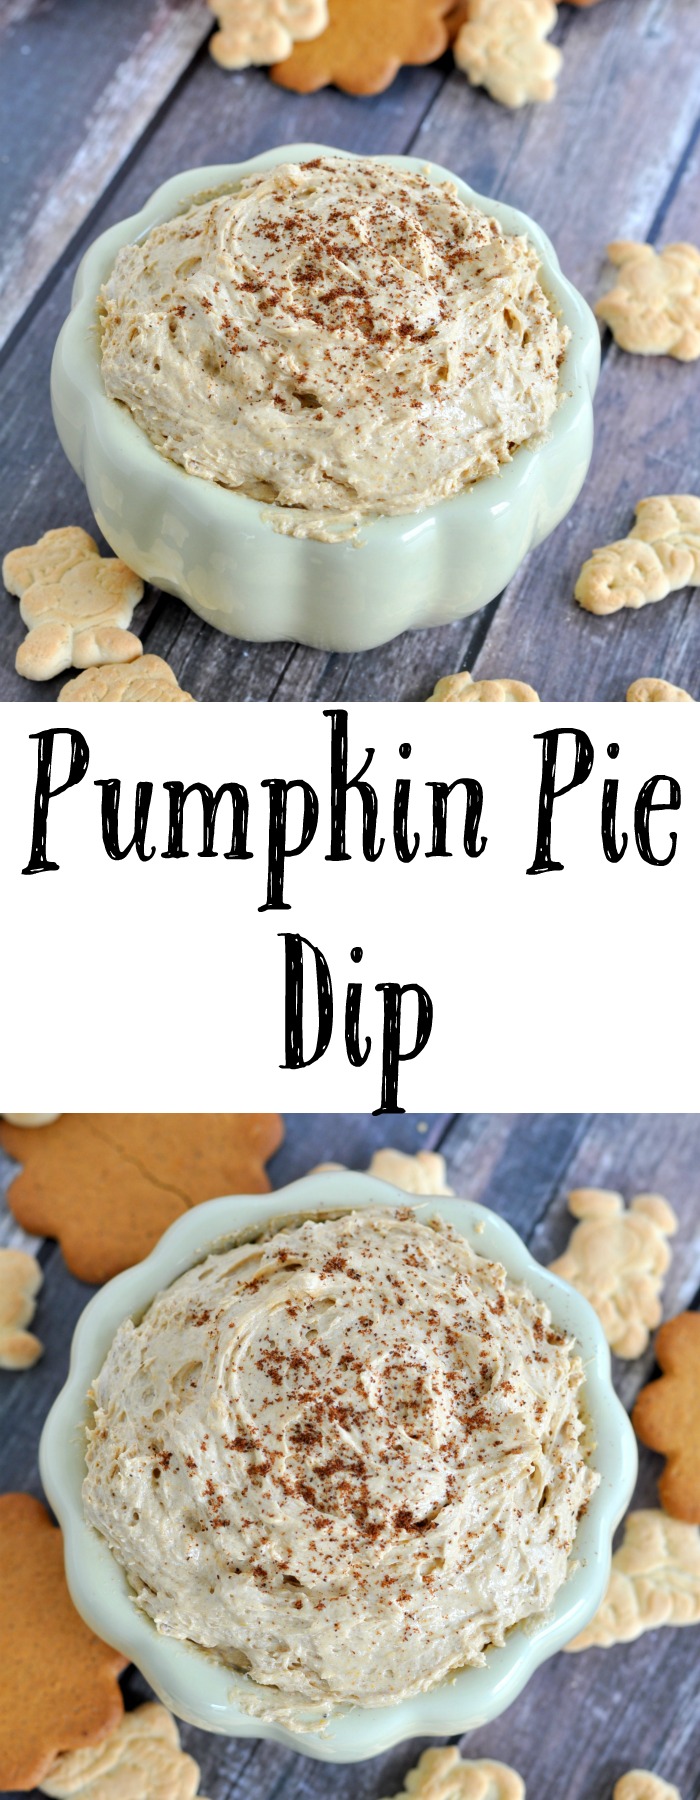 You only need 4 ingredients to make this amazing pumpkin pie dip.